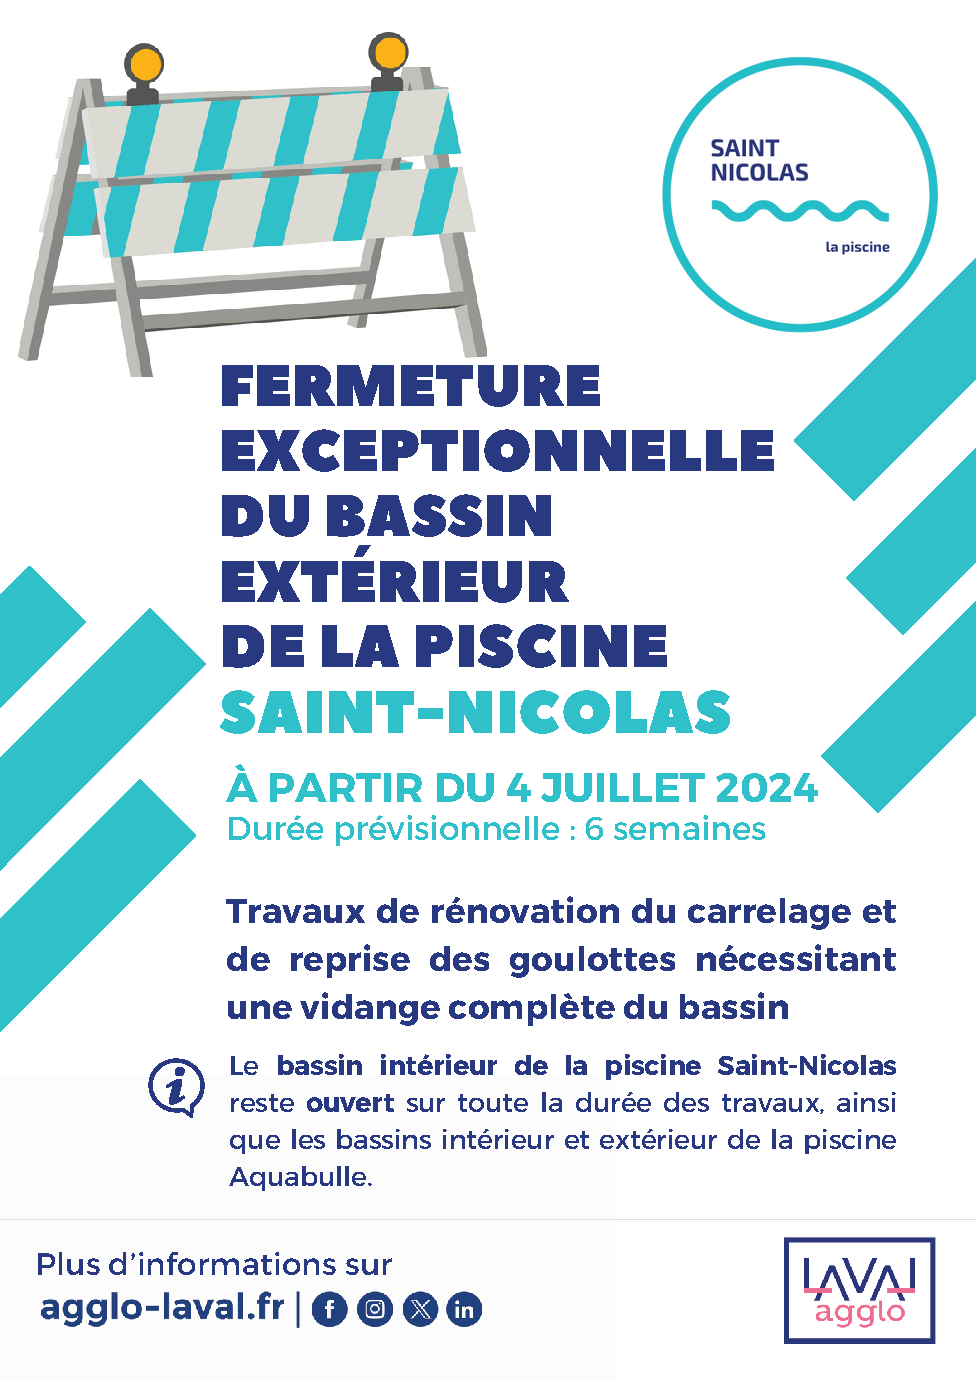 https://www.laval.fr/fileadmin/Phototheque_agglo/Actualites/ACTUALITES_2024/Fermeture_bassin_piscine_St-N_ete_24.png